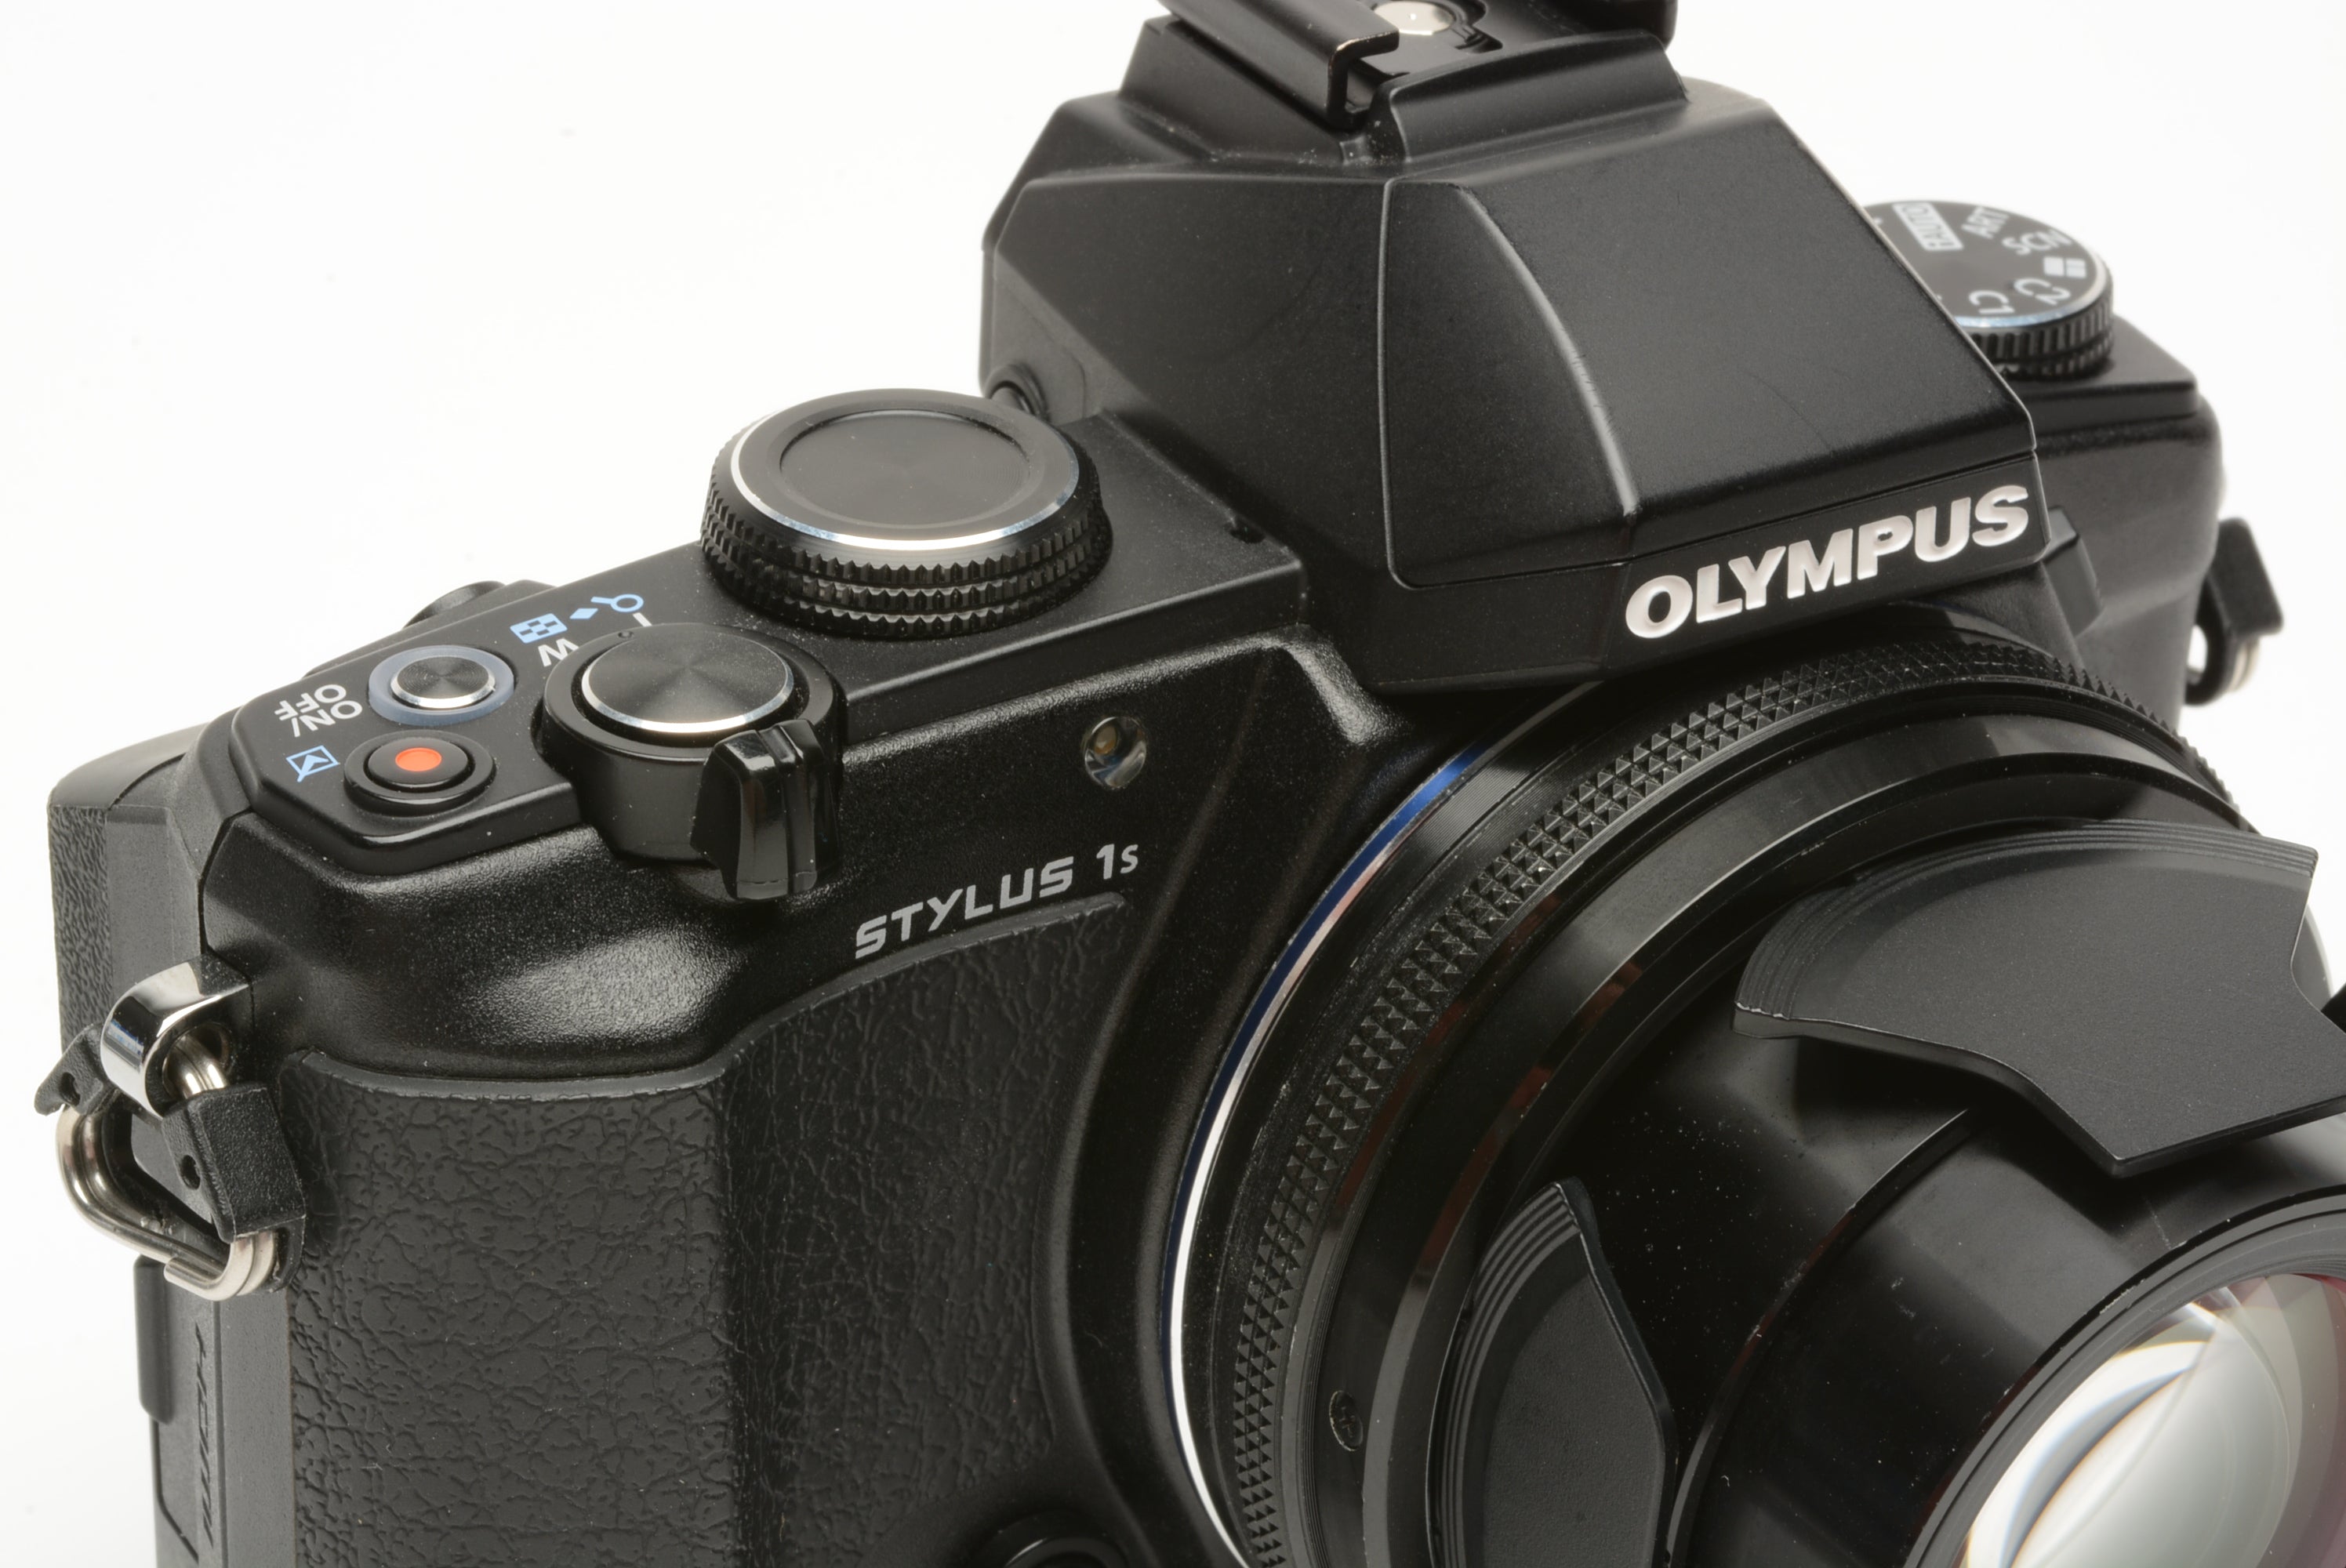 Olympus Stylus 1s Digital Camera w/2 batts, charger, strap, USB, 23K acts,  Very clean, boxed